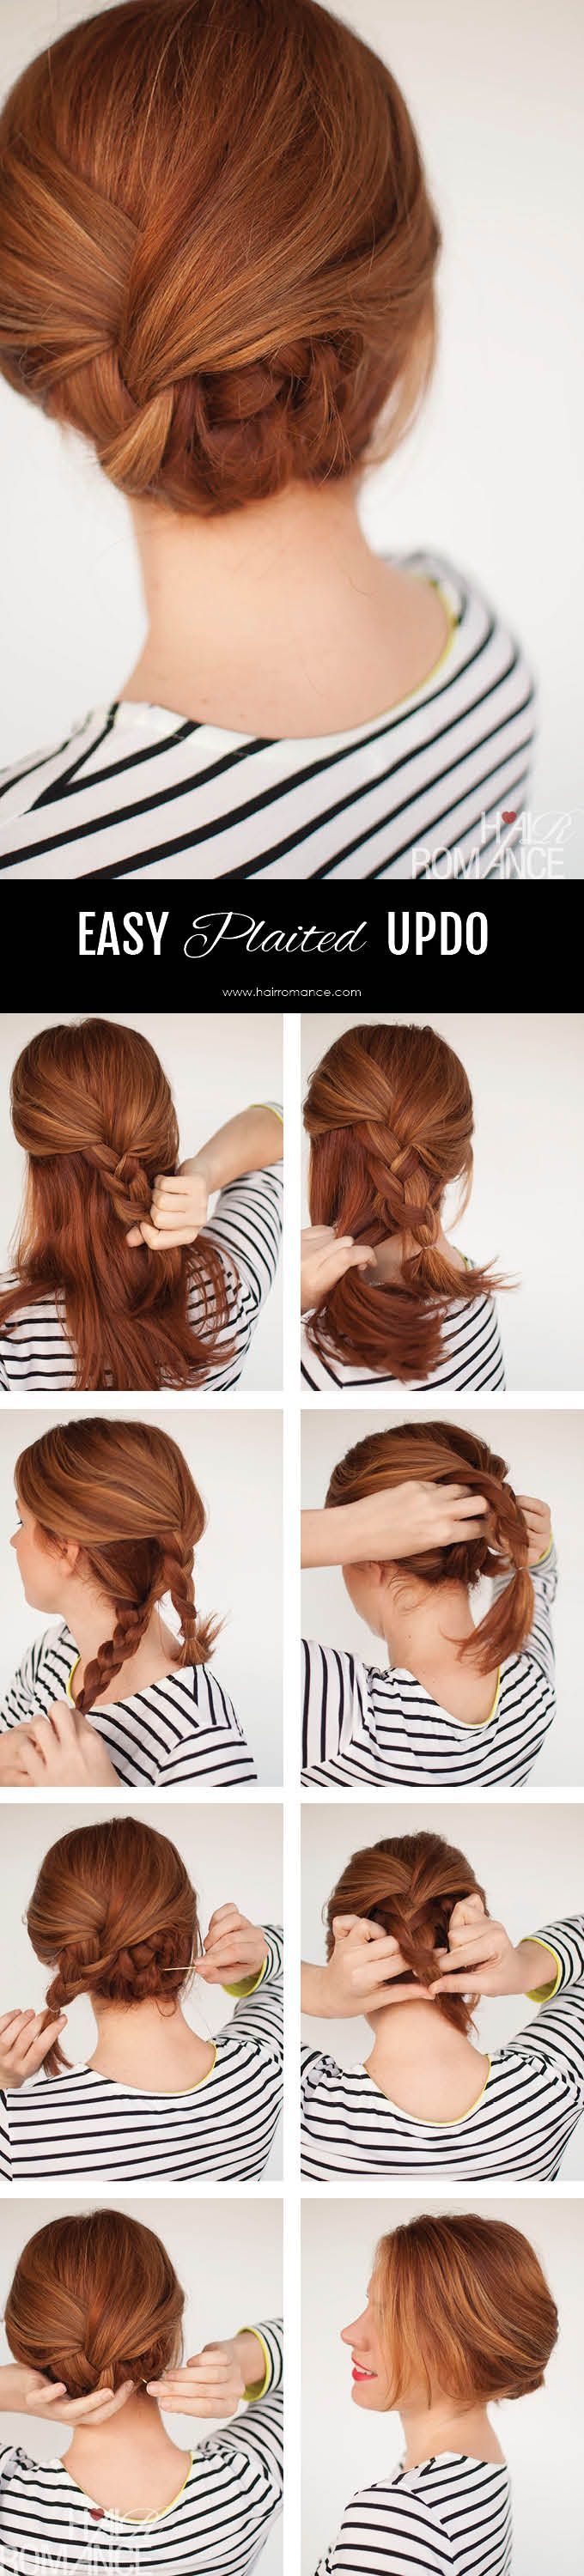 Easy plaited updo hairstyle tutorial